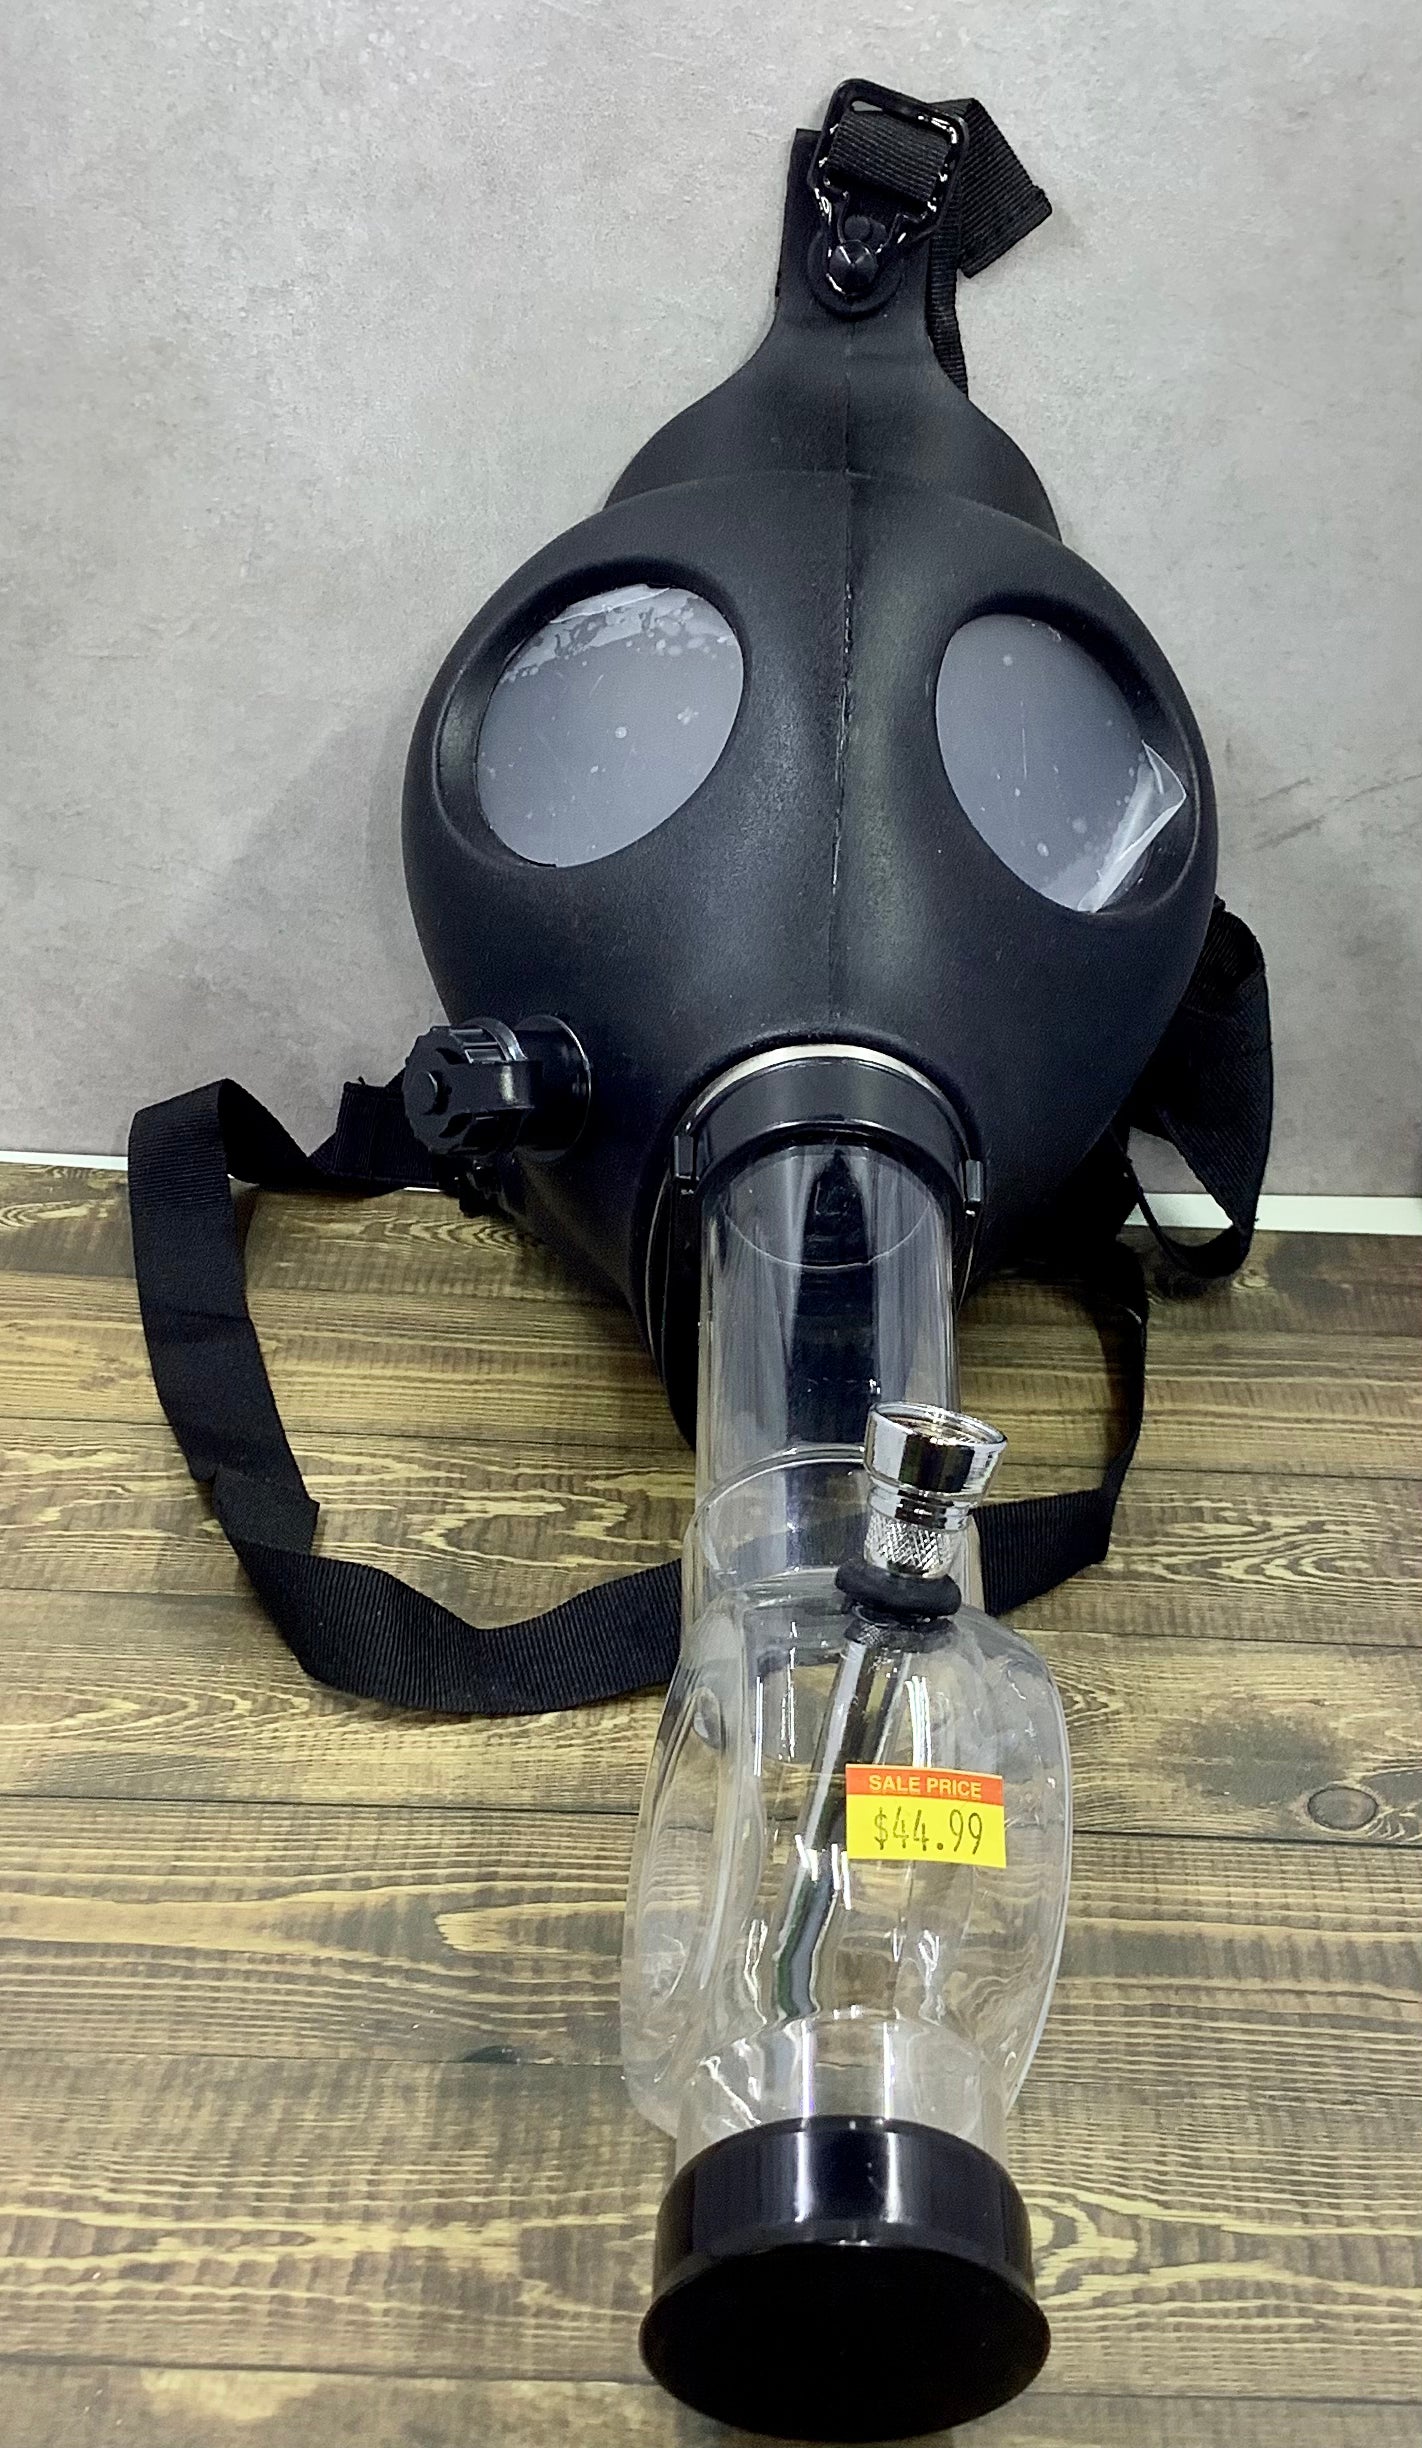 Gas Mask Water Pipe yoga smokes yoga studio, delivery, delivery near me, yoga smokes smoke shop, find smoke shop, head shop near me, yoga studio, headshop, head shop, local smoke shop, psl, psl smoke shop, smoke shop, smokeshop, yoga, yoga studio, dispensary, local dispensary, smokeshop near me, port saint lucie, florida, port st lucie, lounge, life, highlife, love, stoned, highsociety. Yoga Smokes Black & Clear